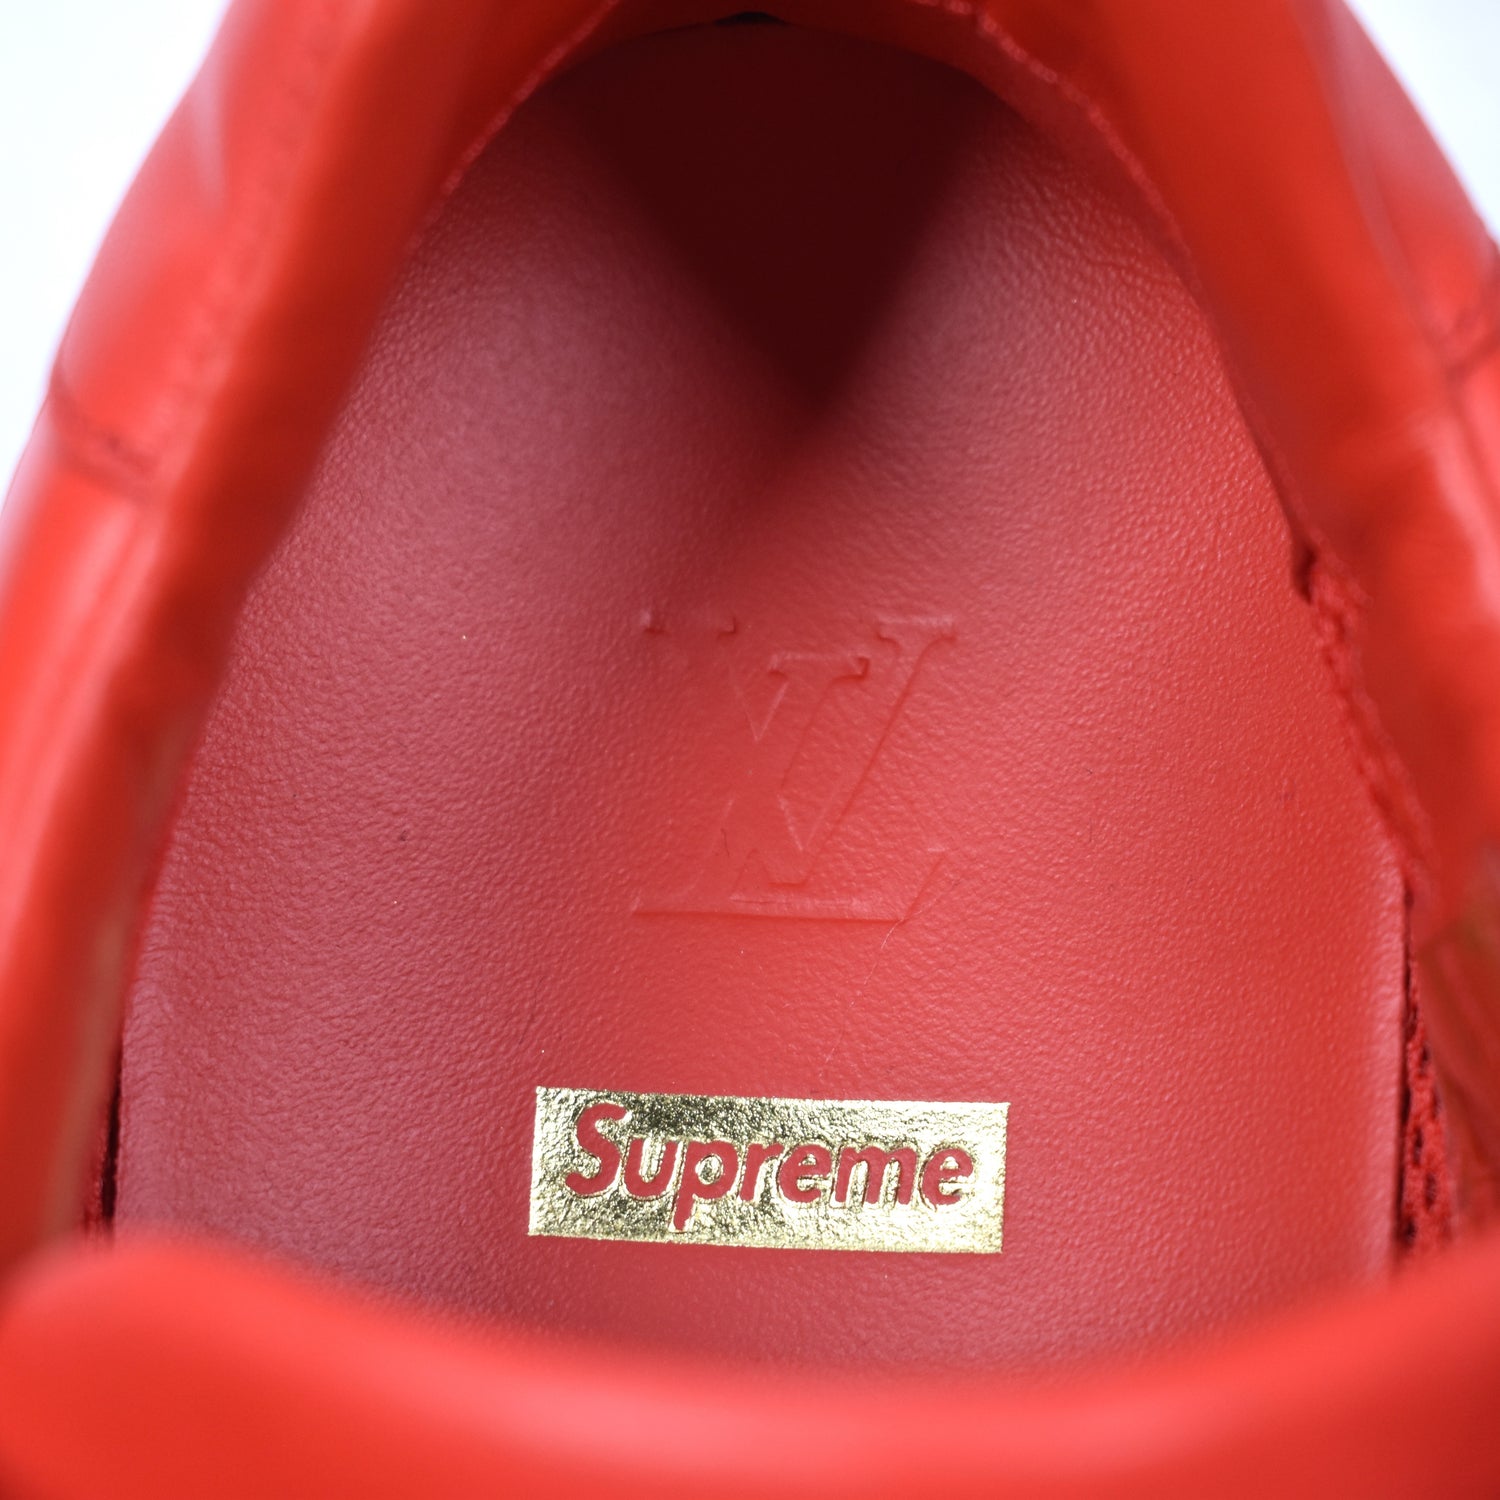 Supreme Louis Vuitton LV Shoes - First Look